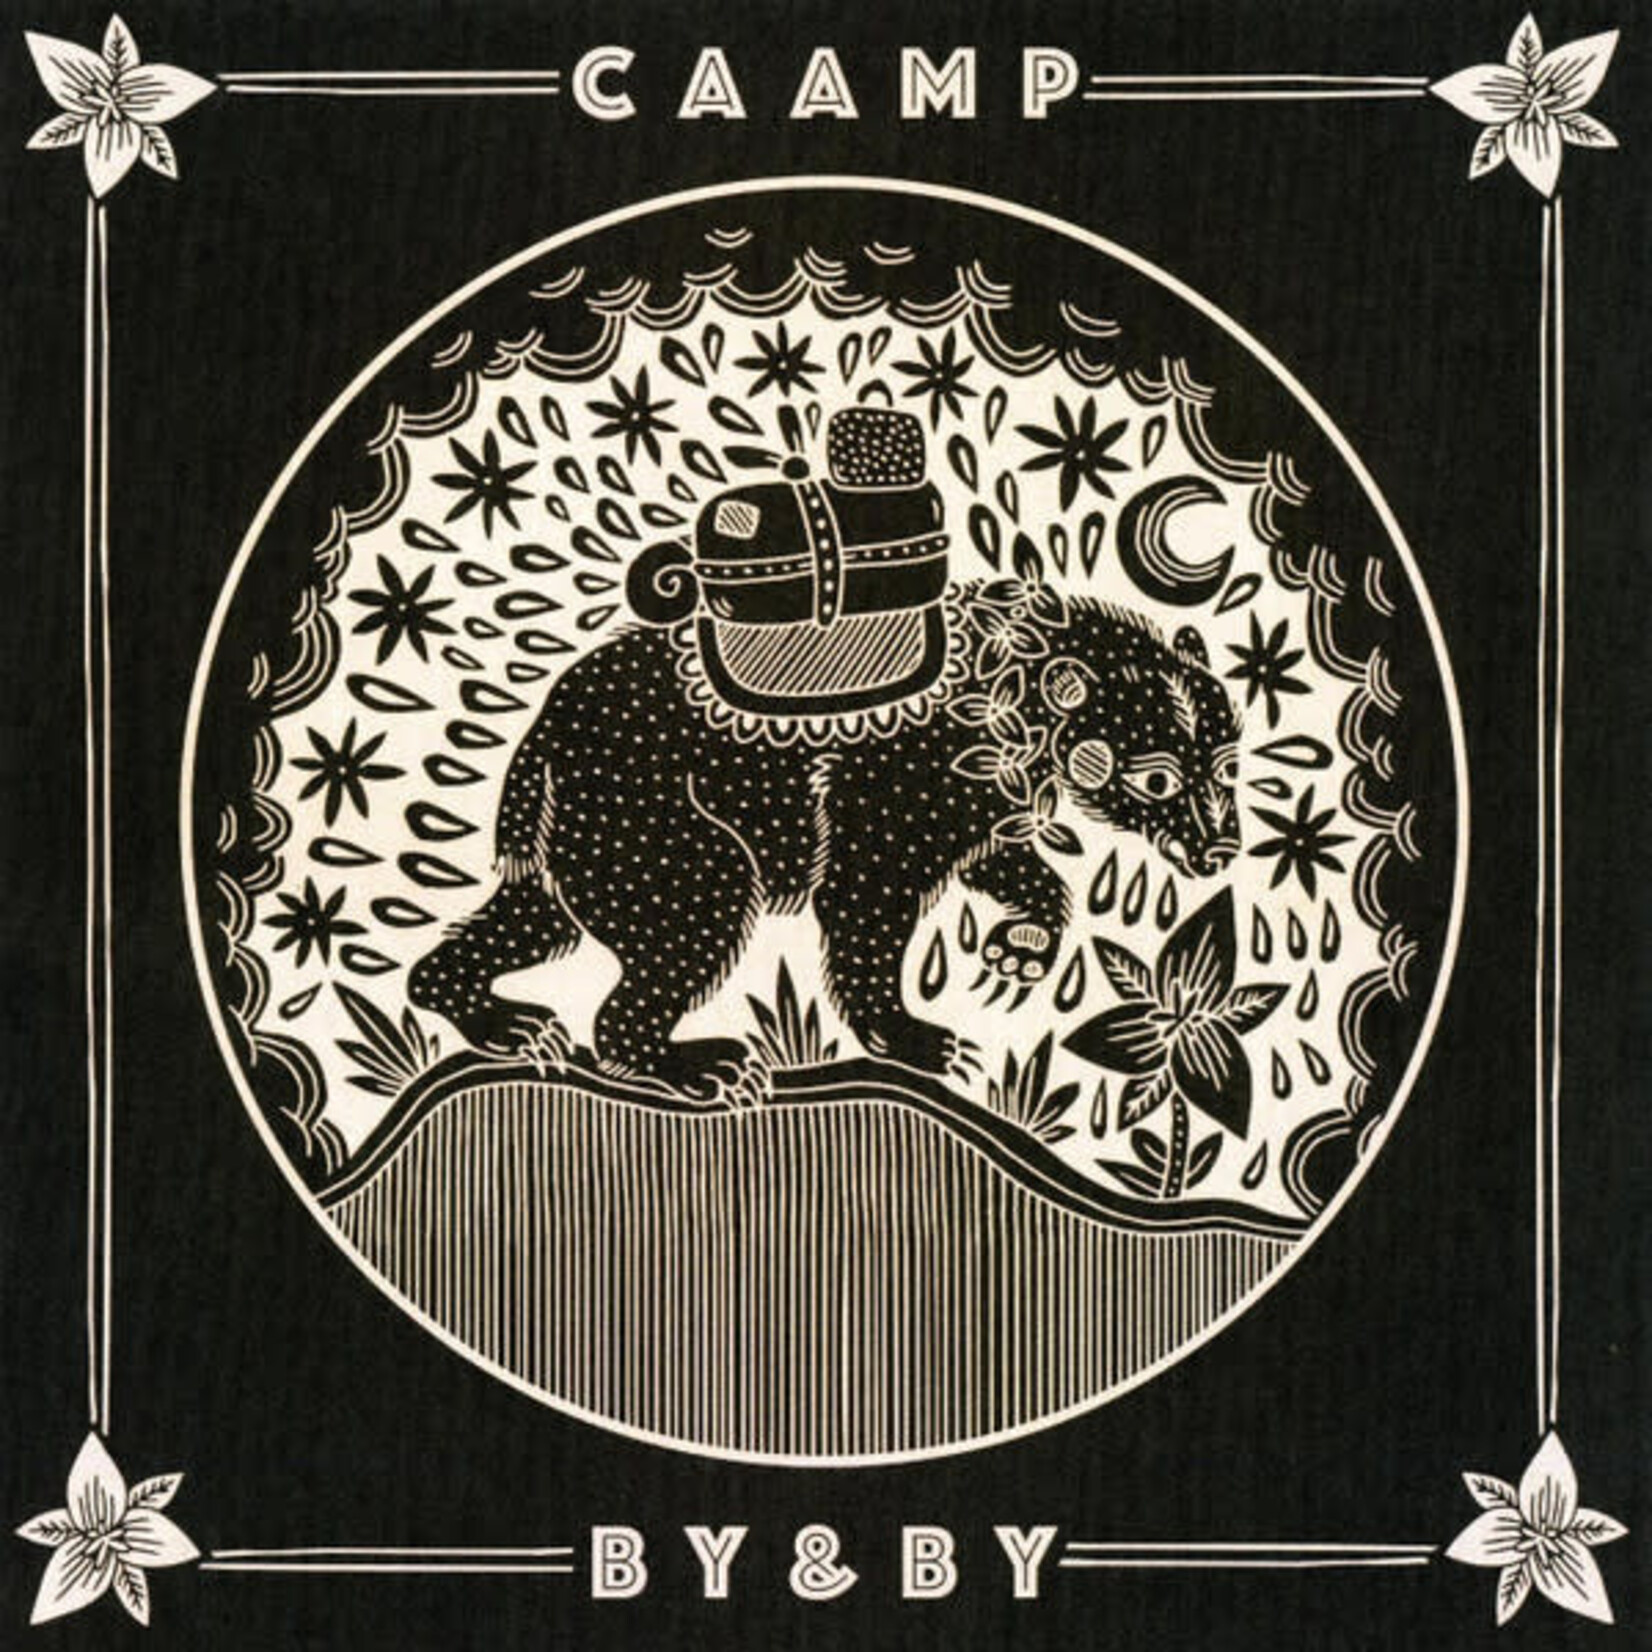 Mom+Pop Caamp - By & By (2LP) [Black/White]